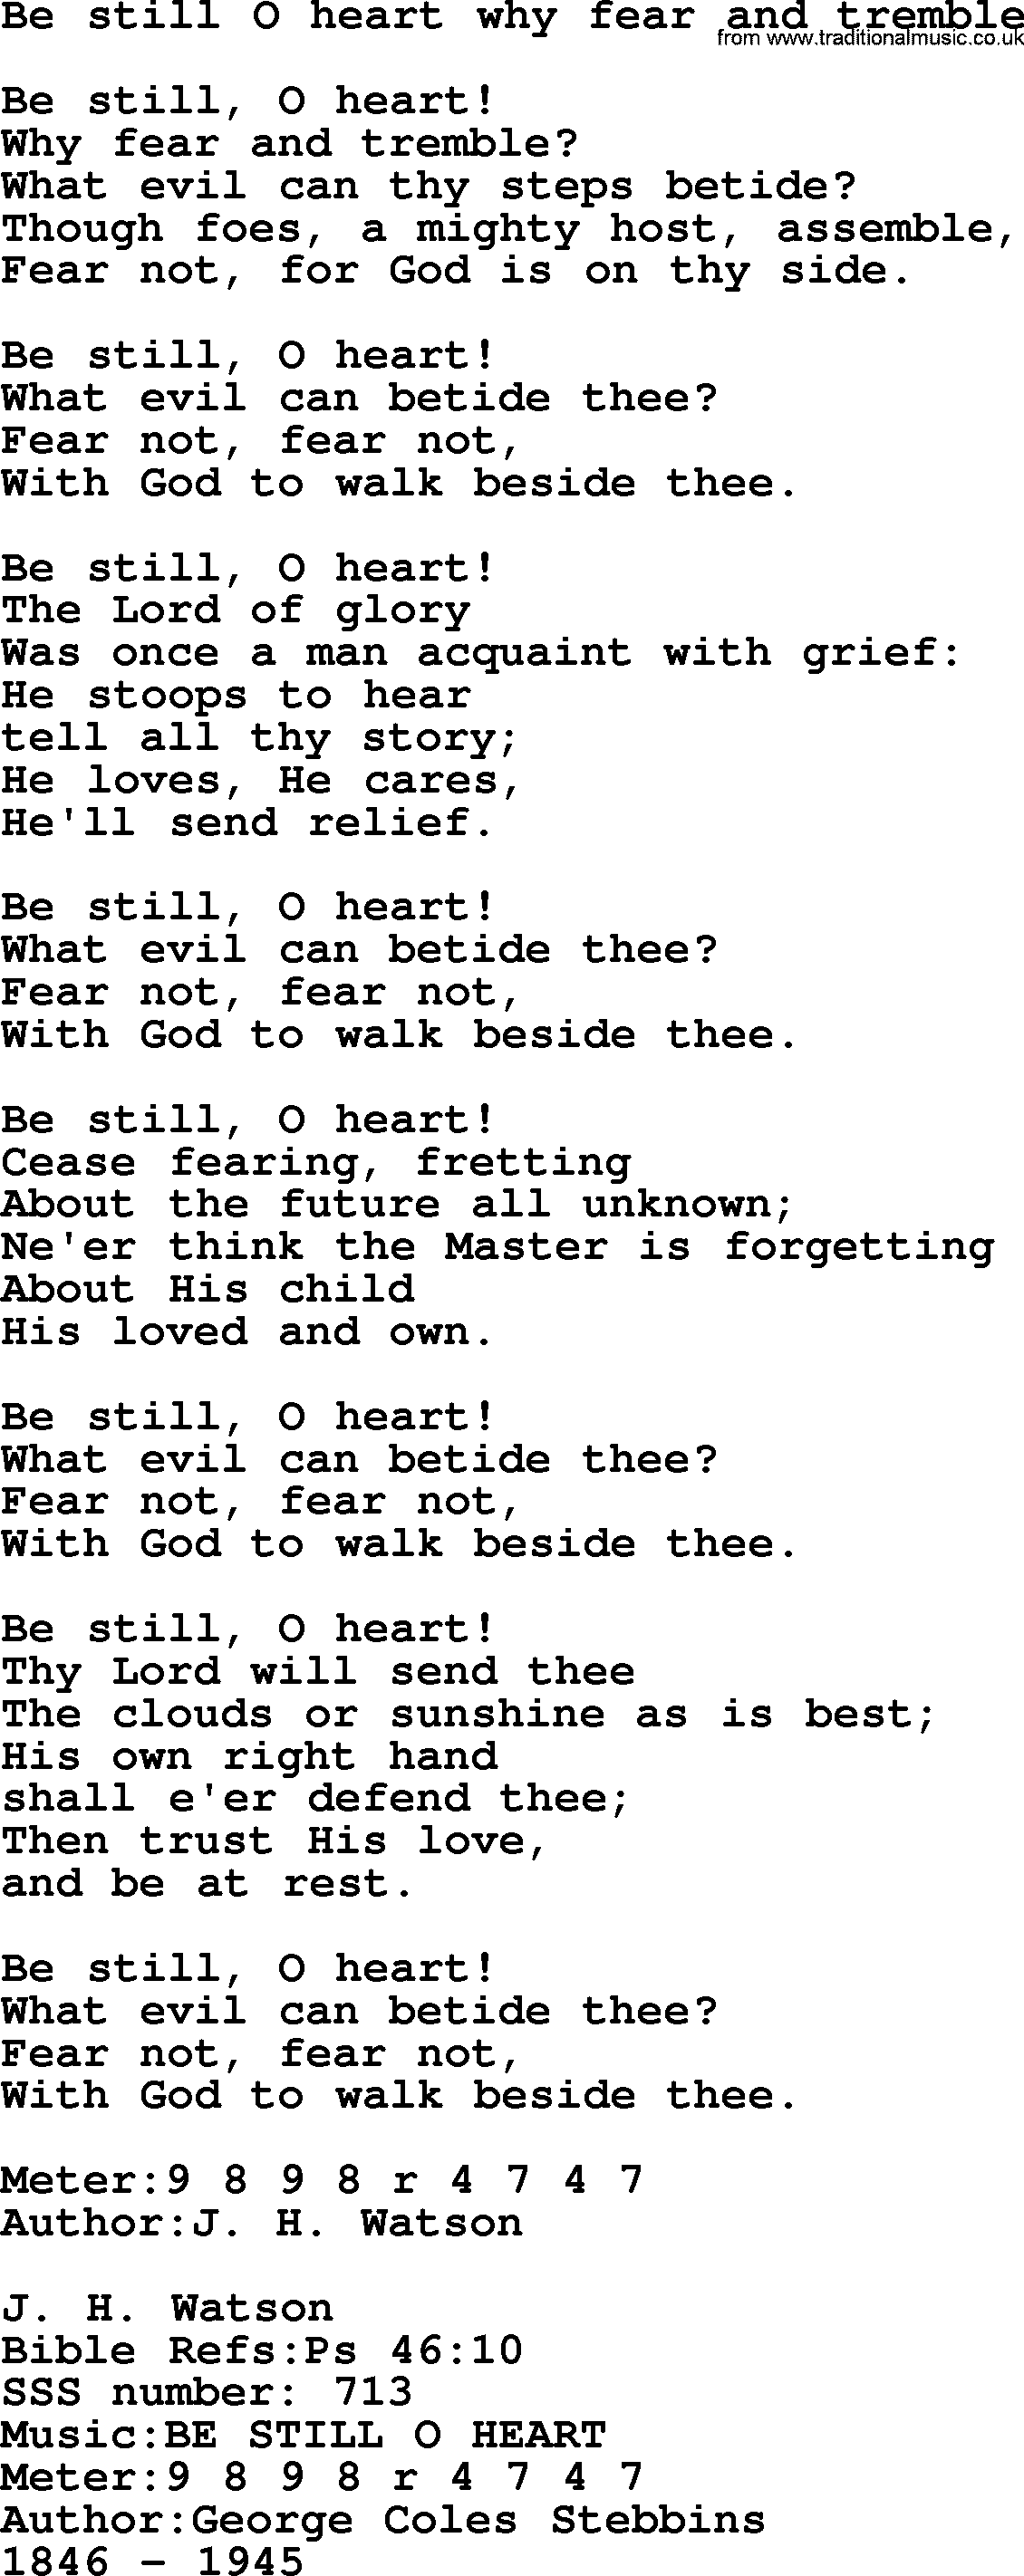 Sacred Songs and Solos complete, 1200 Hymns, title: Be Still O Heart Why Fear And Tremble, lyrics and PDF